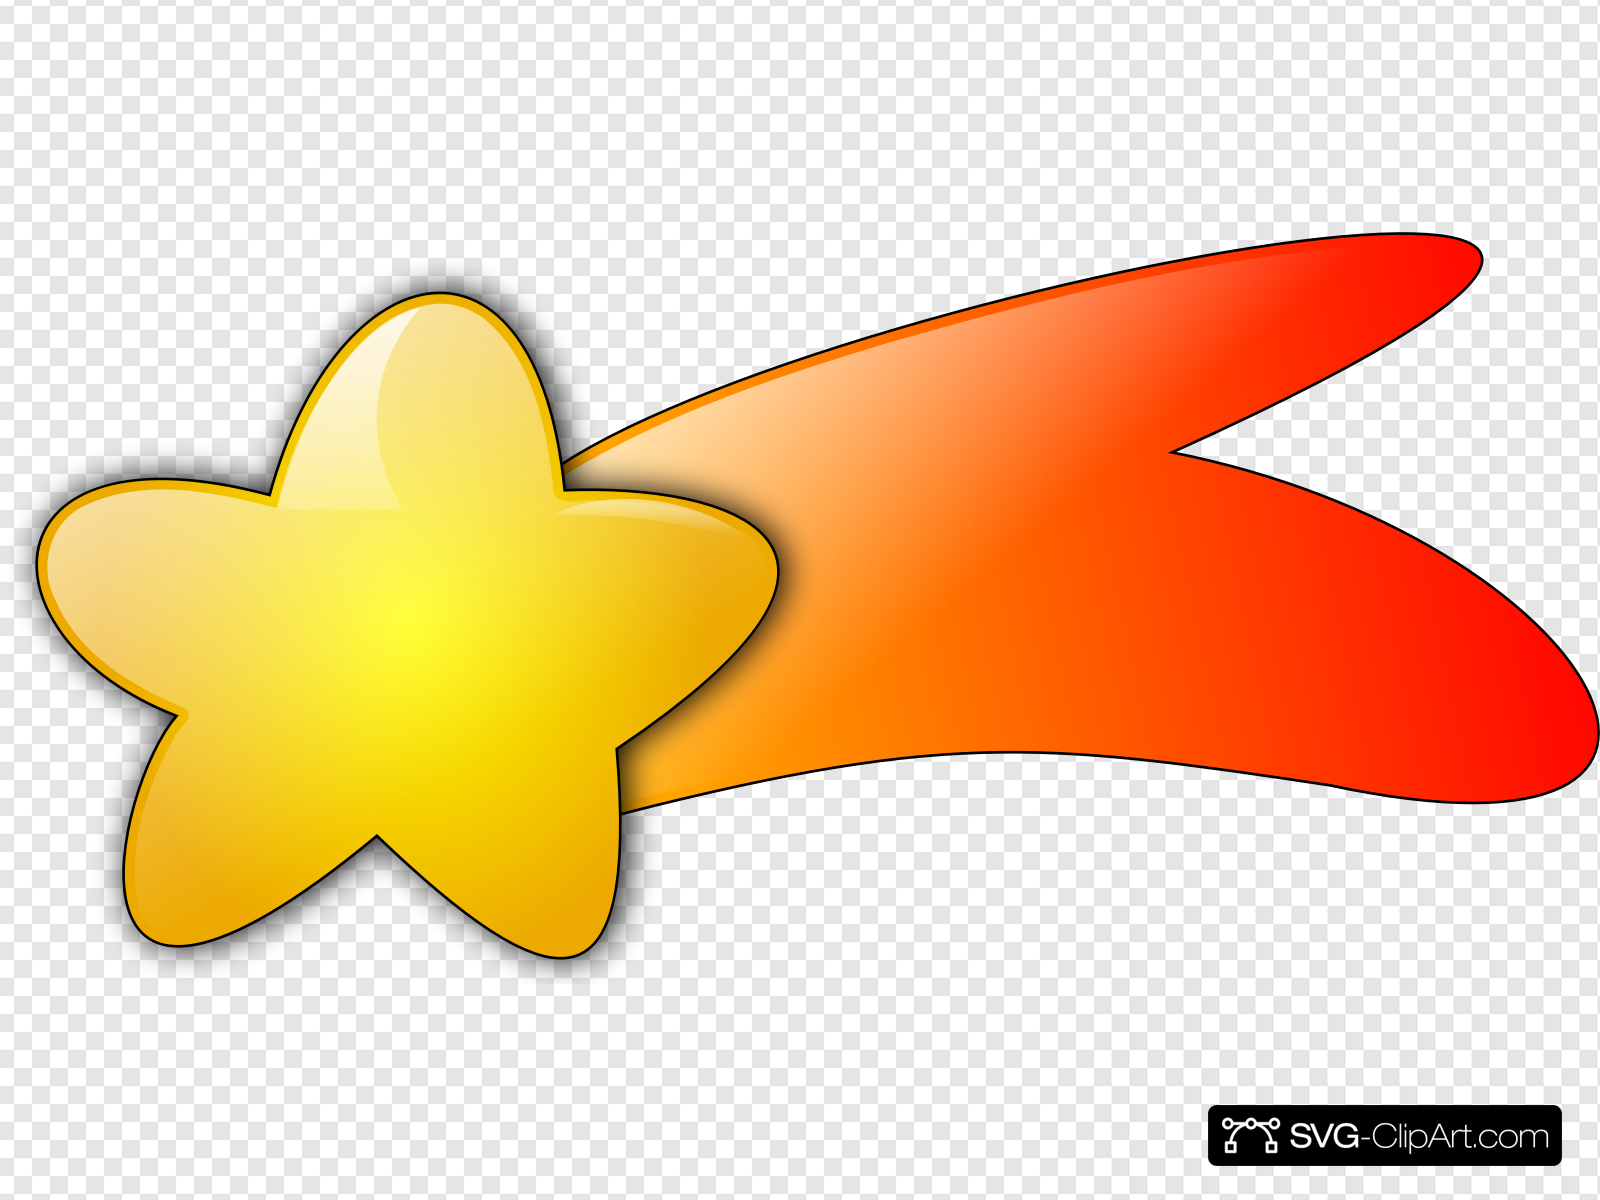 Shooting Star Clip art, Icon and SVG